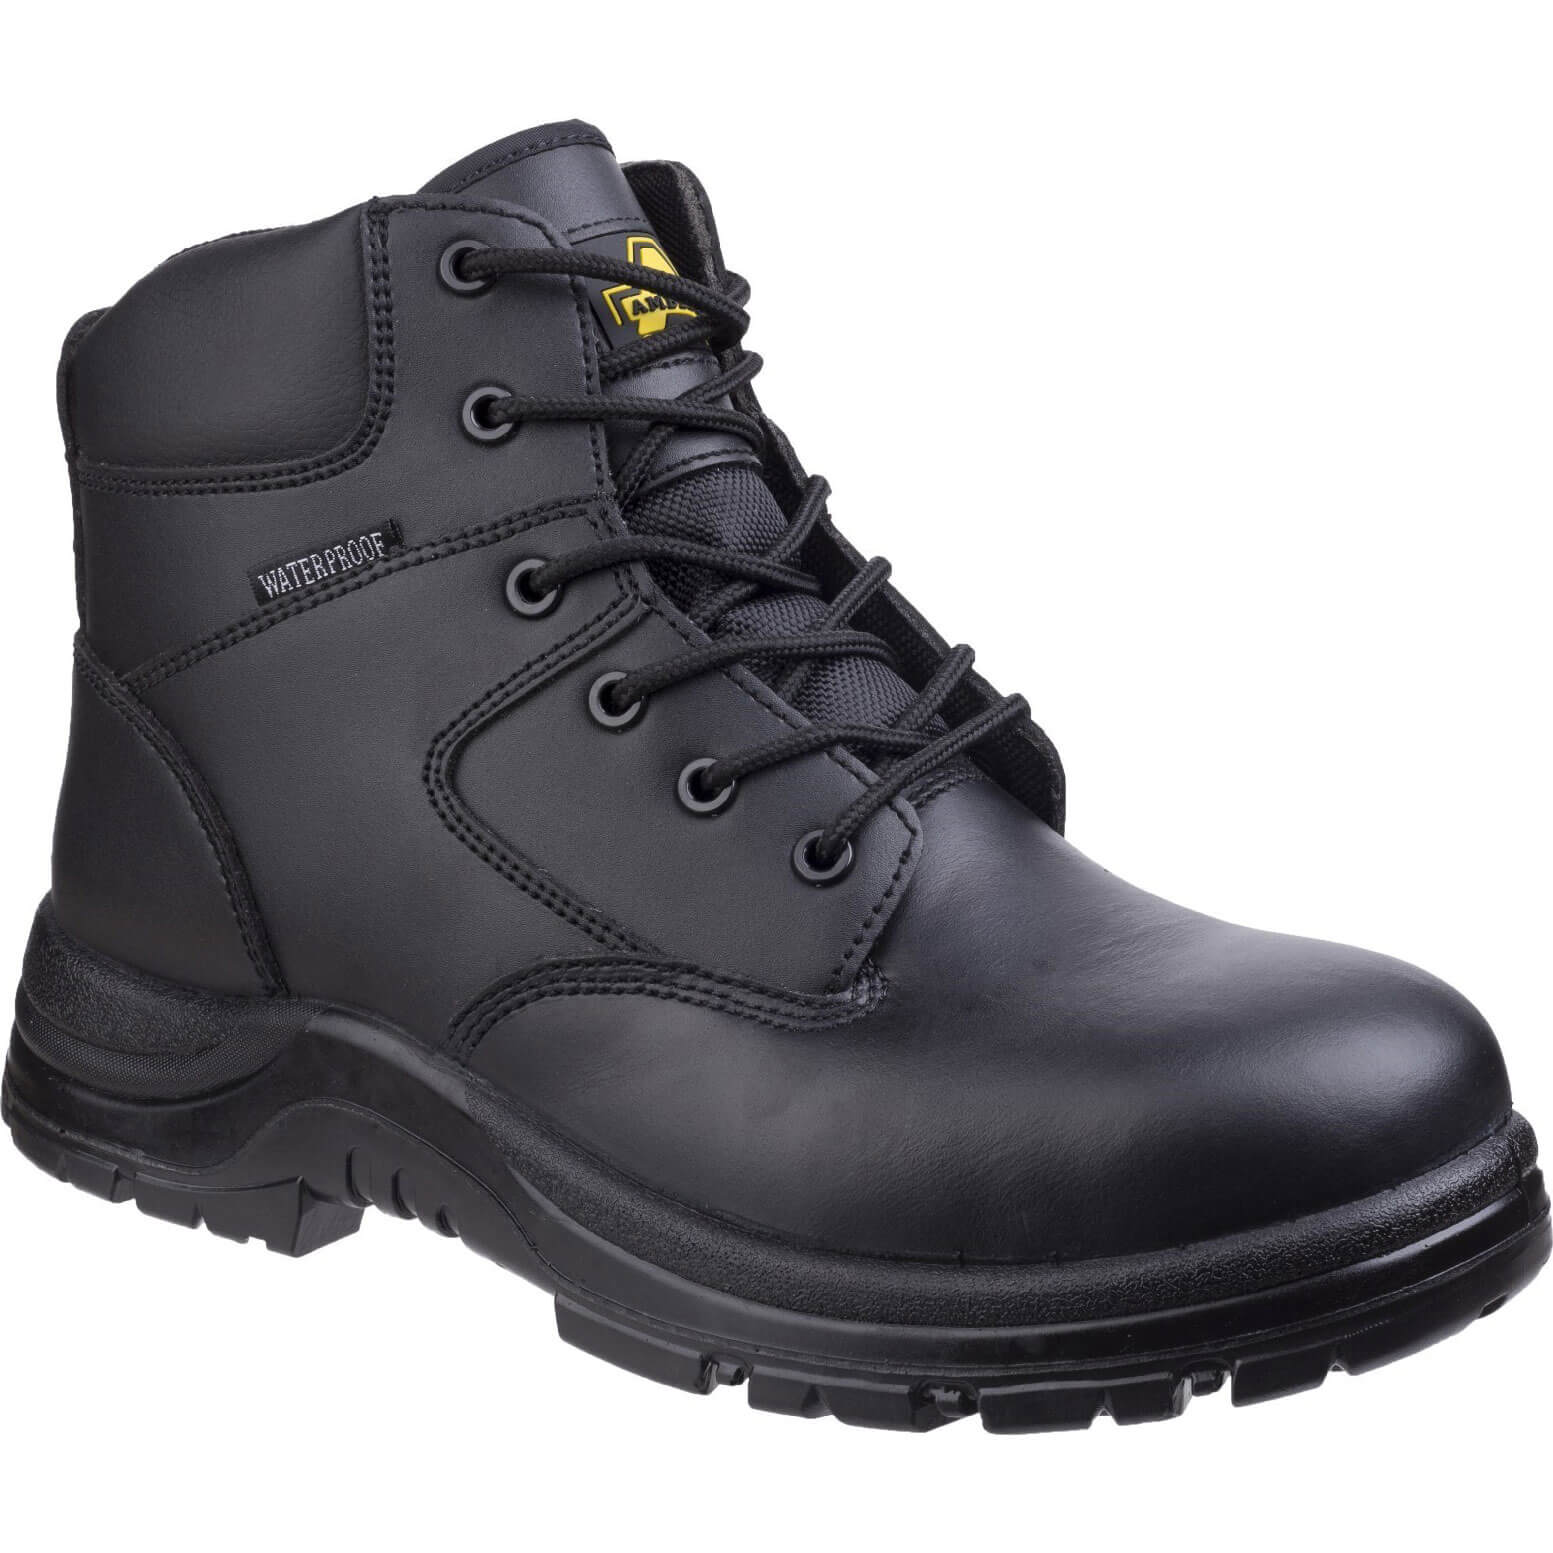 Amblers Mens Safety FS006C Metal Free Waterproof Safety Boots Black Size 4